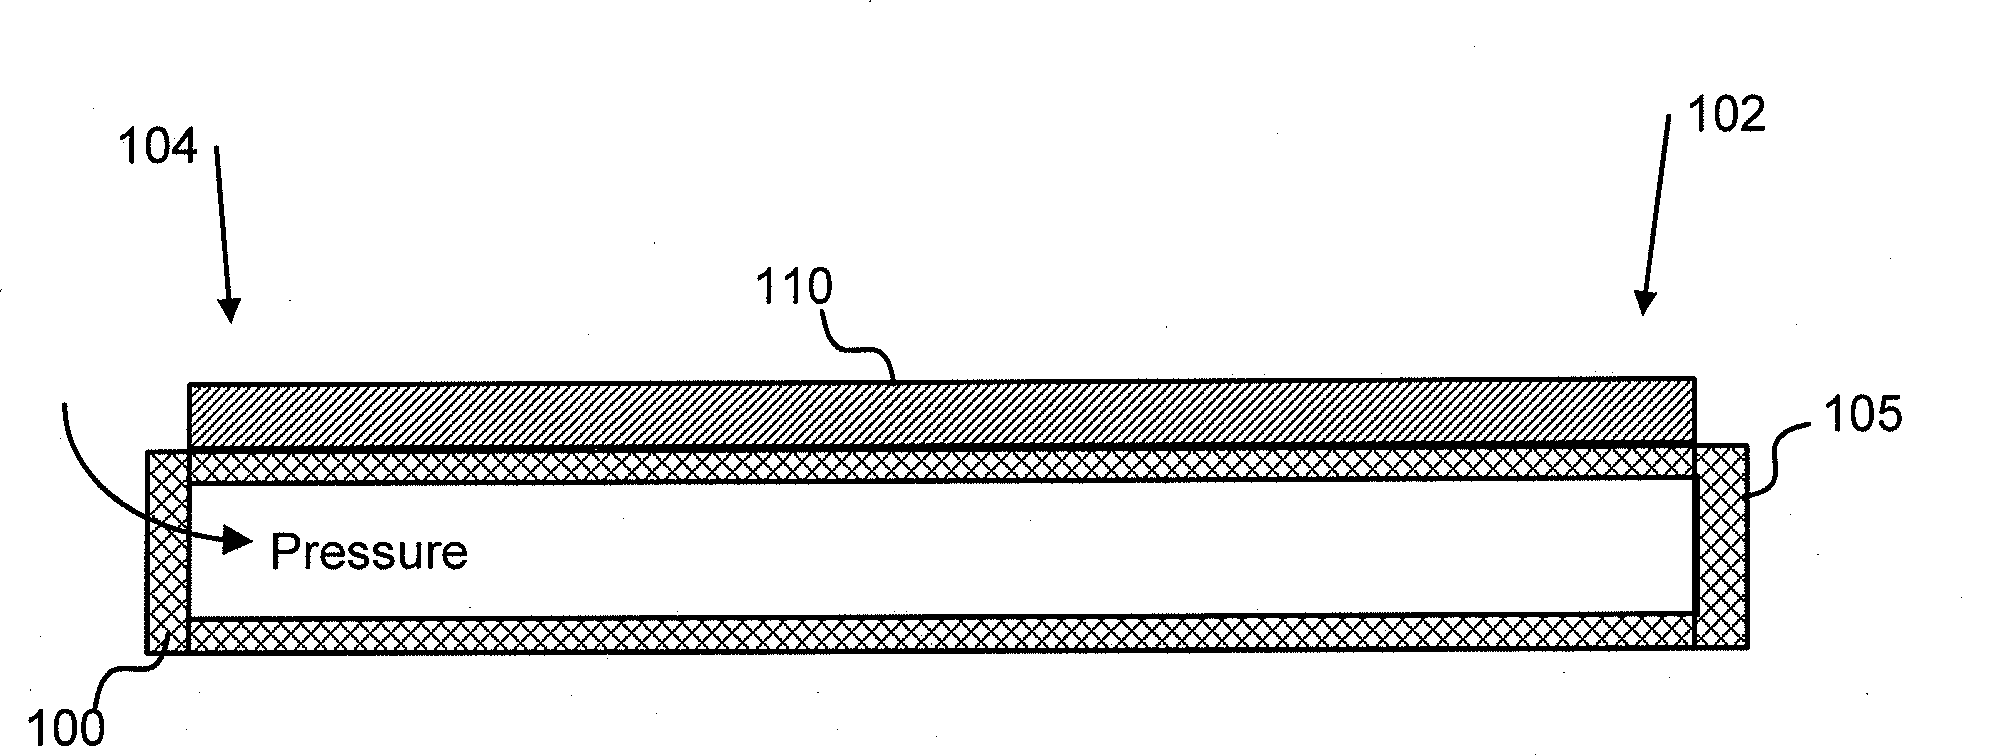 Cured-in-place liner material and methods and systems for manufacture